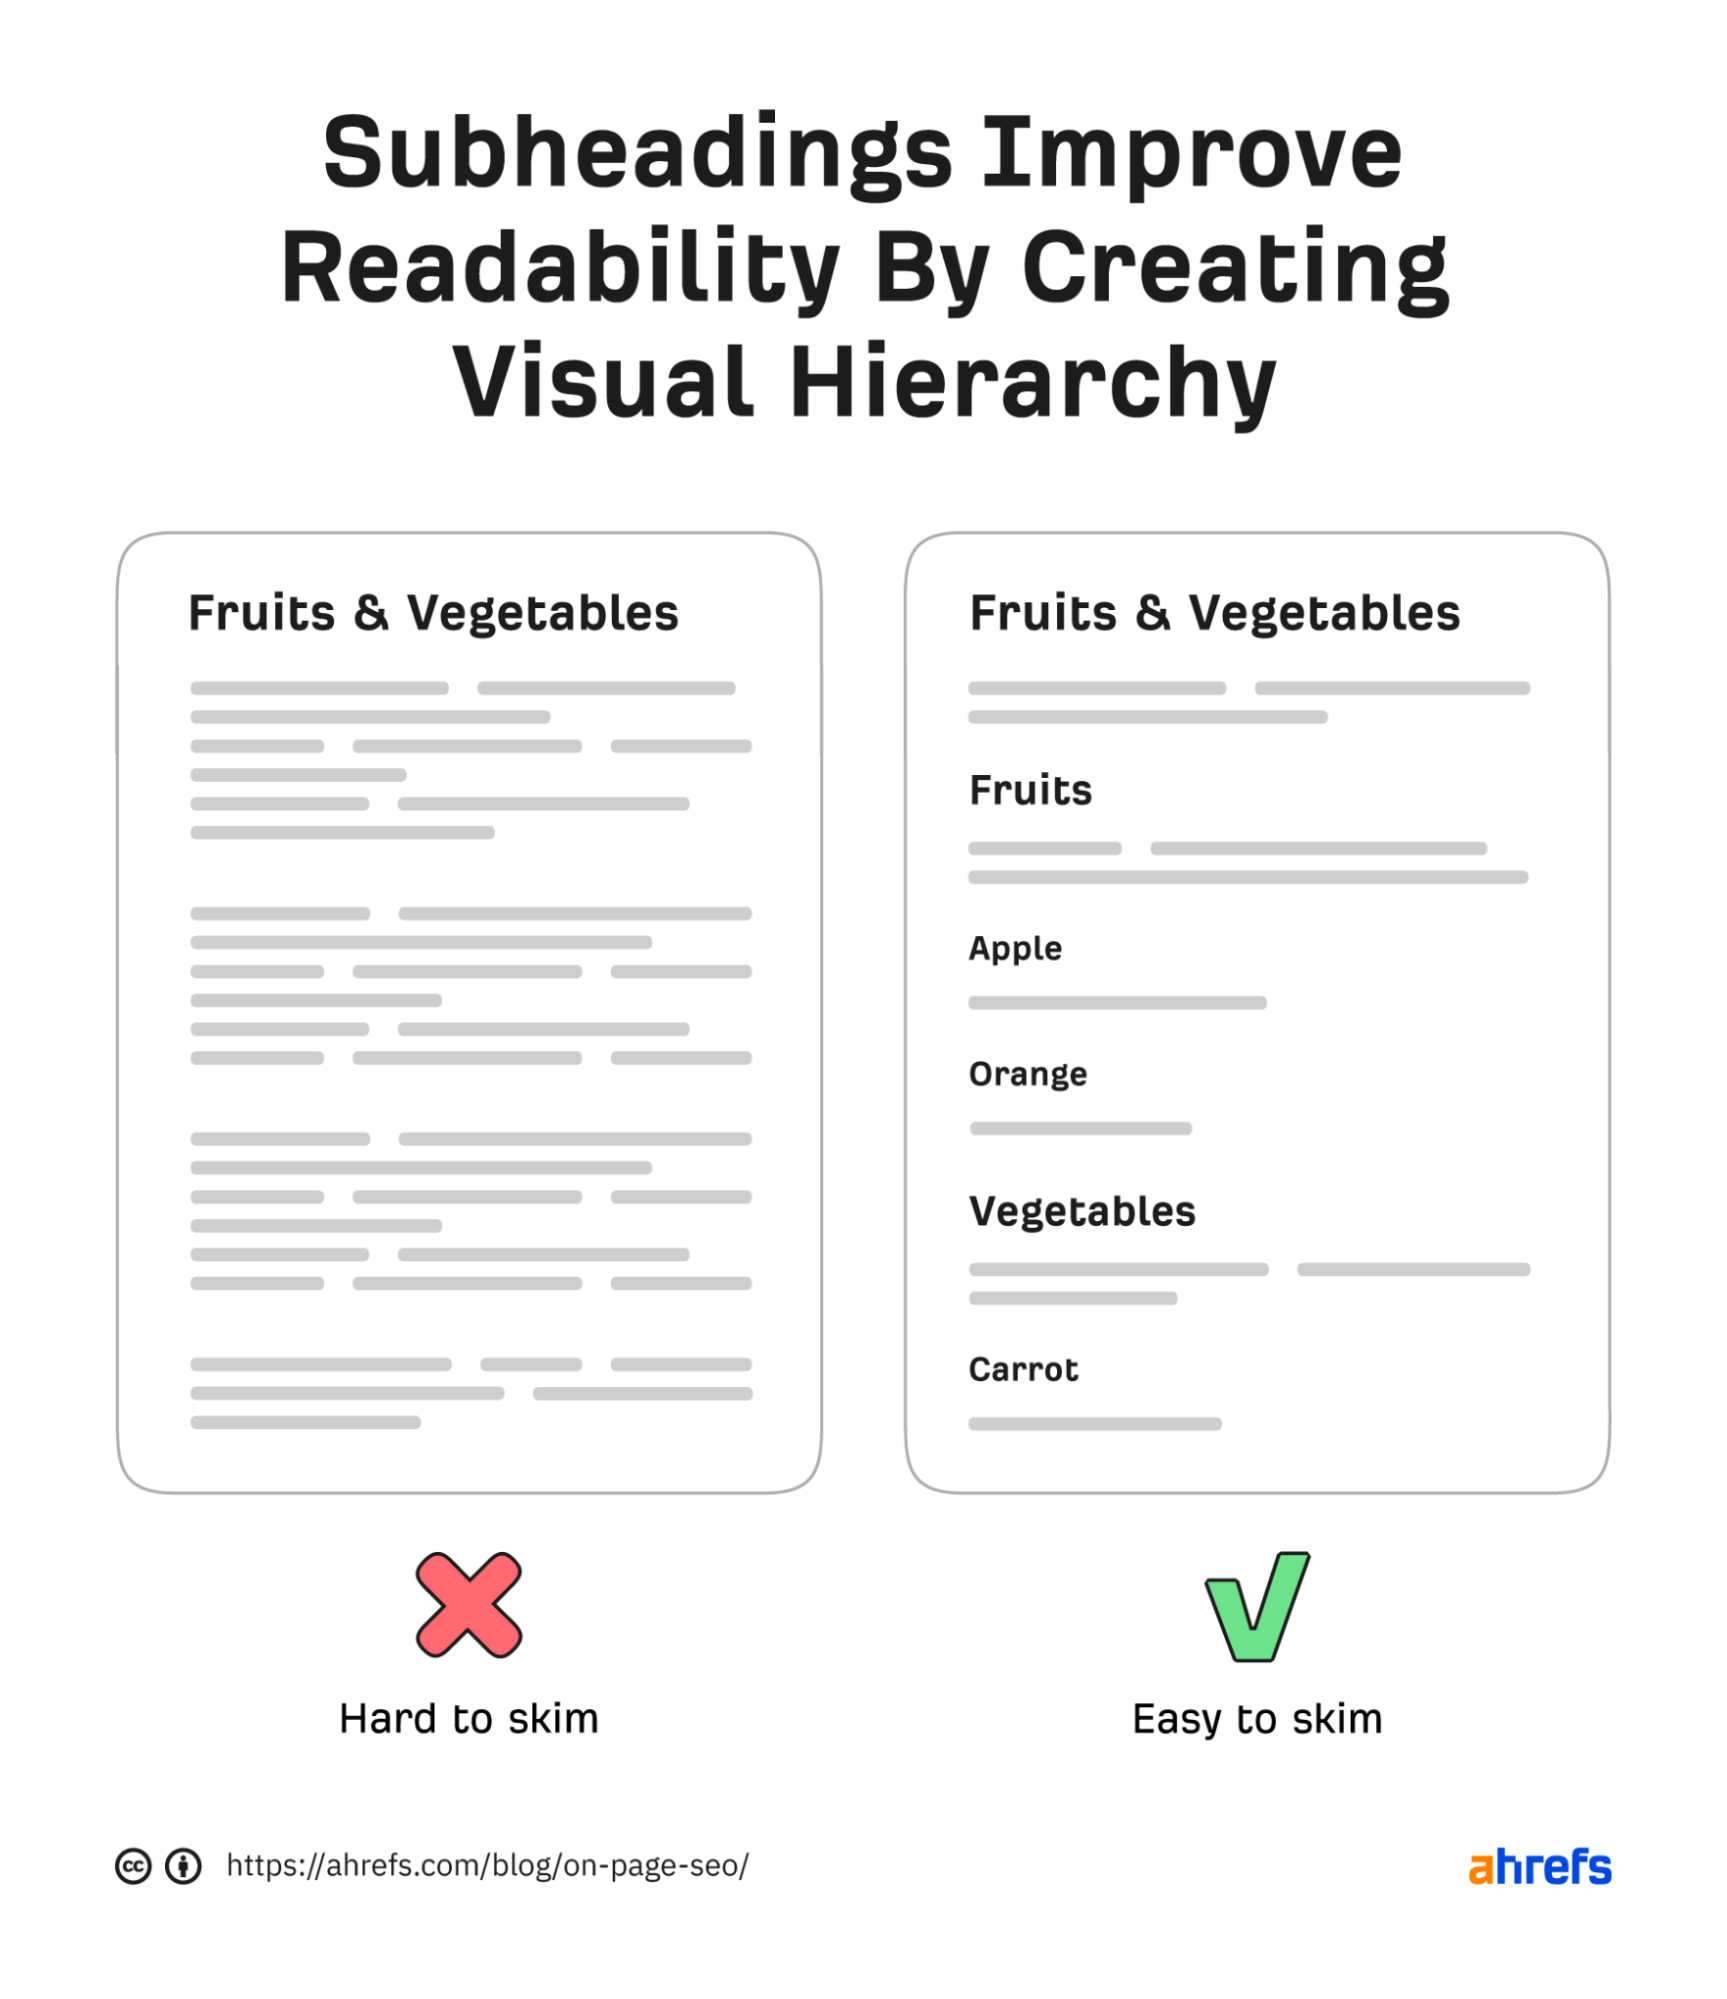 Subheadings improve readability by creating visual hierarchy
